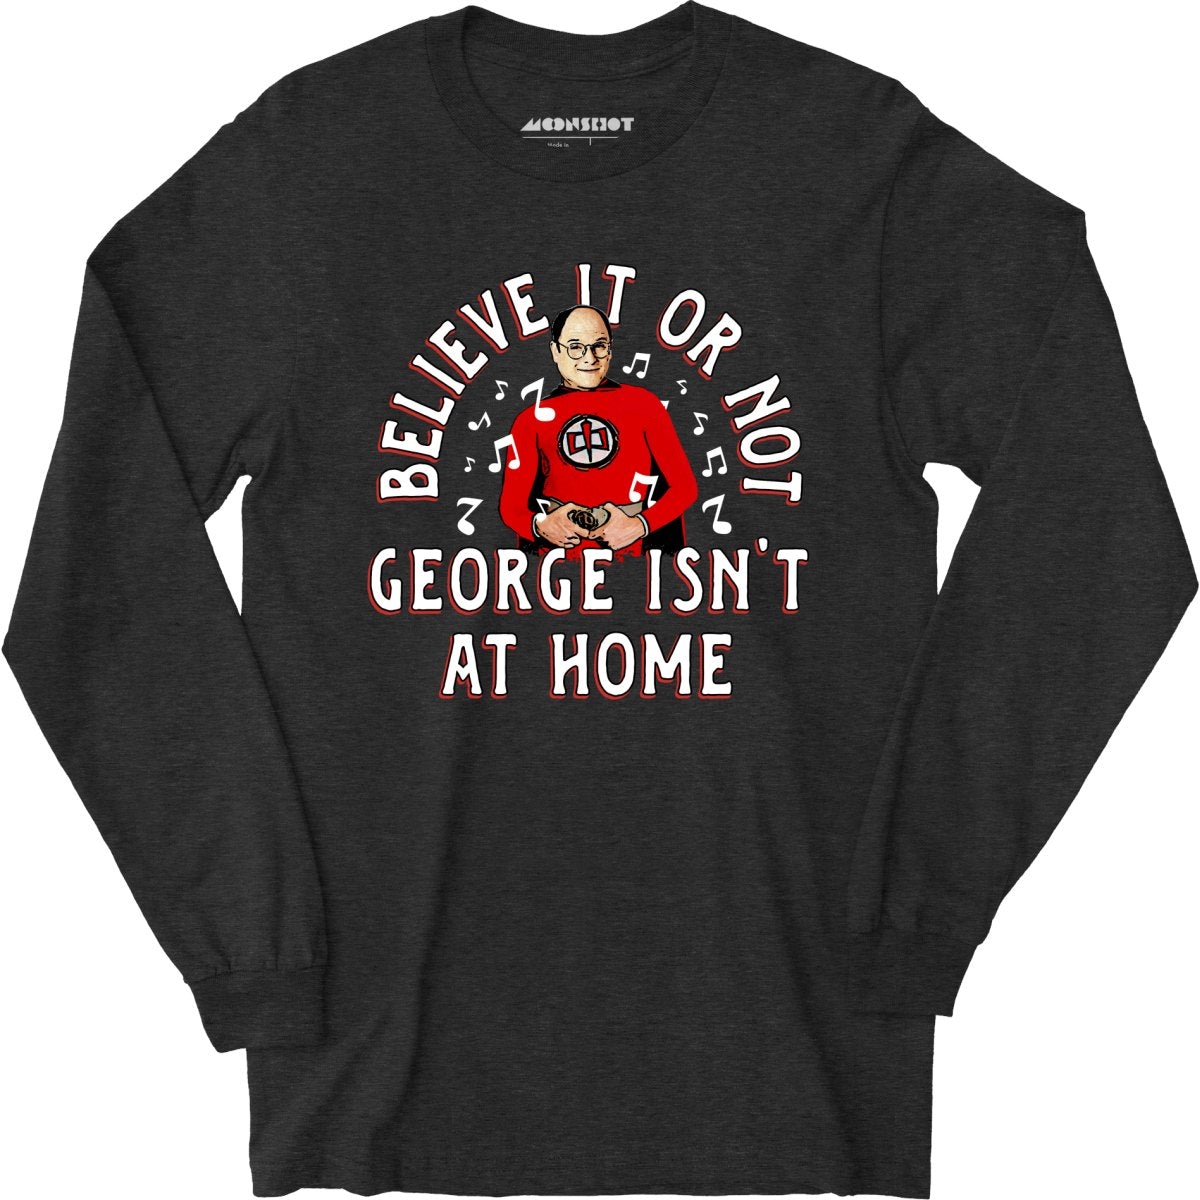 Believe It Or Not George Isn't at Home - Long Sleeve T-Shirt